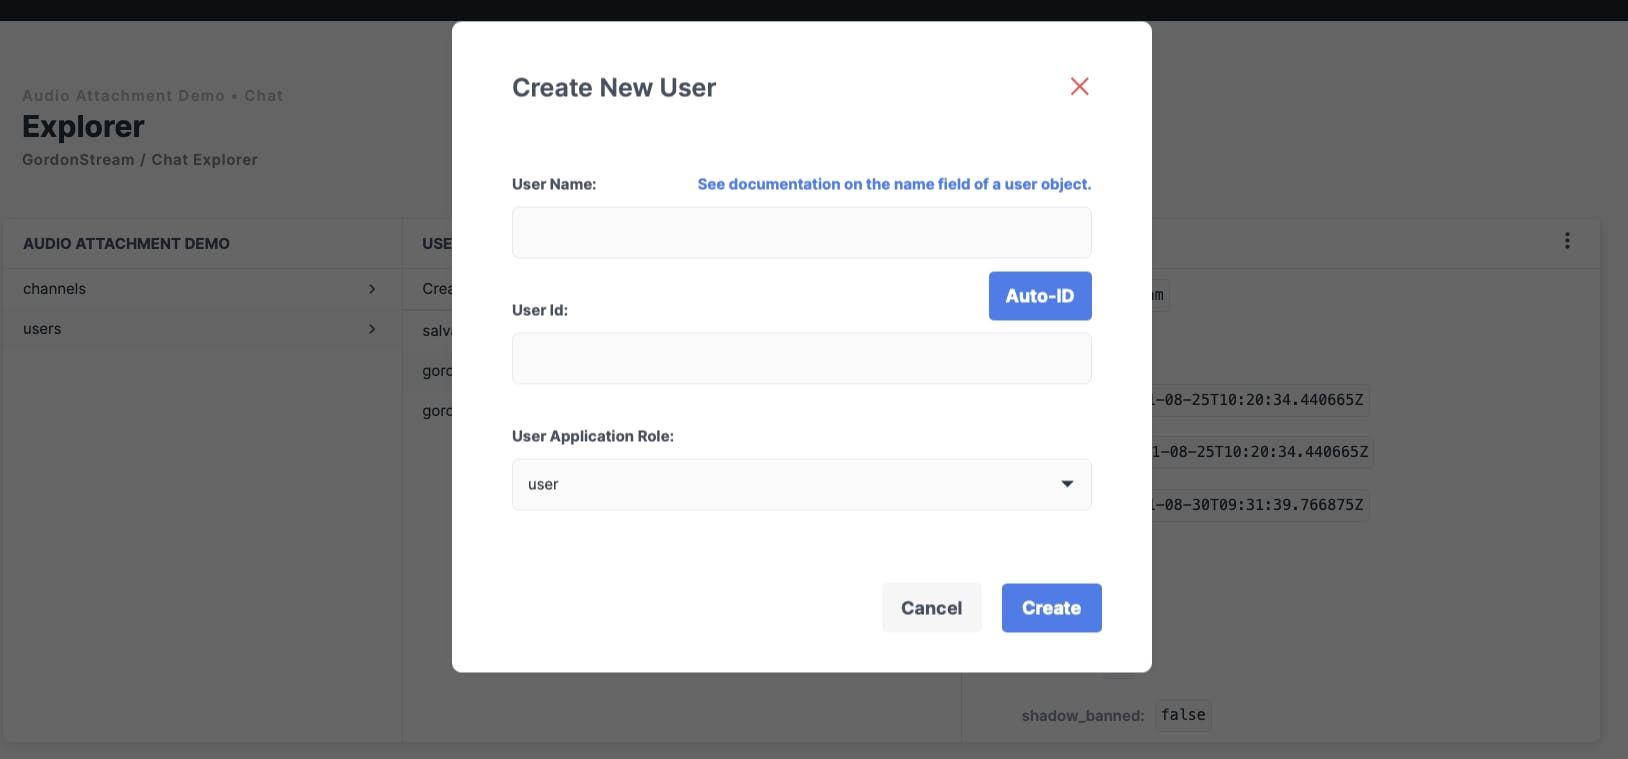 Adding a User Name and User Id for demo users in Chat Explorer